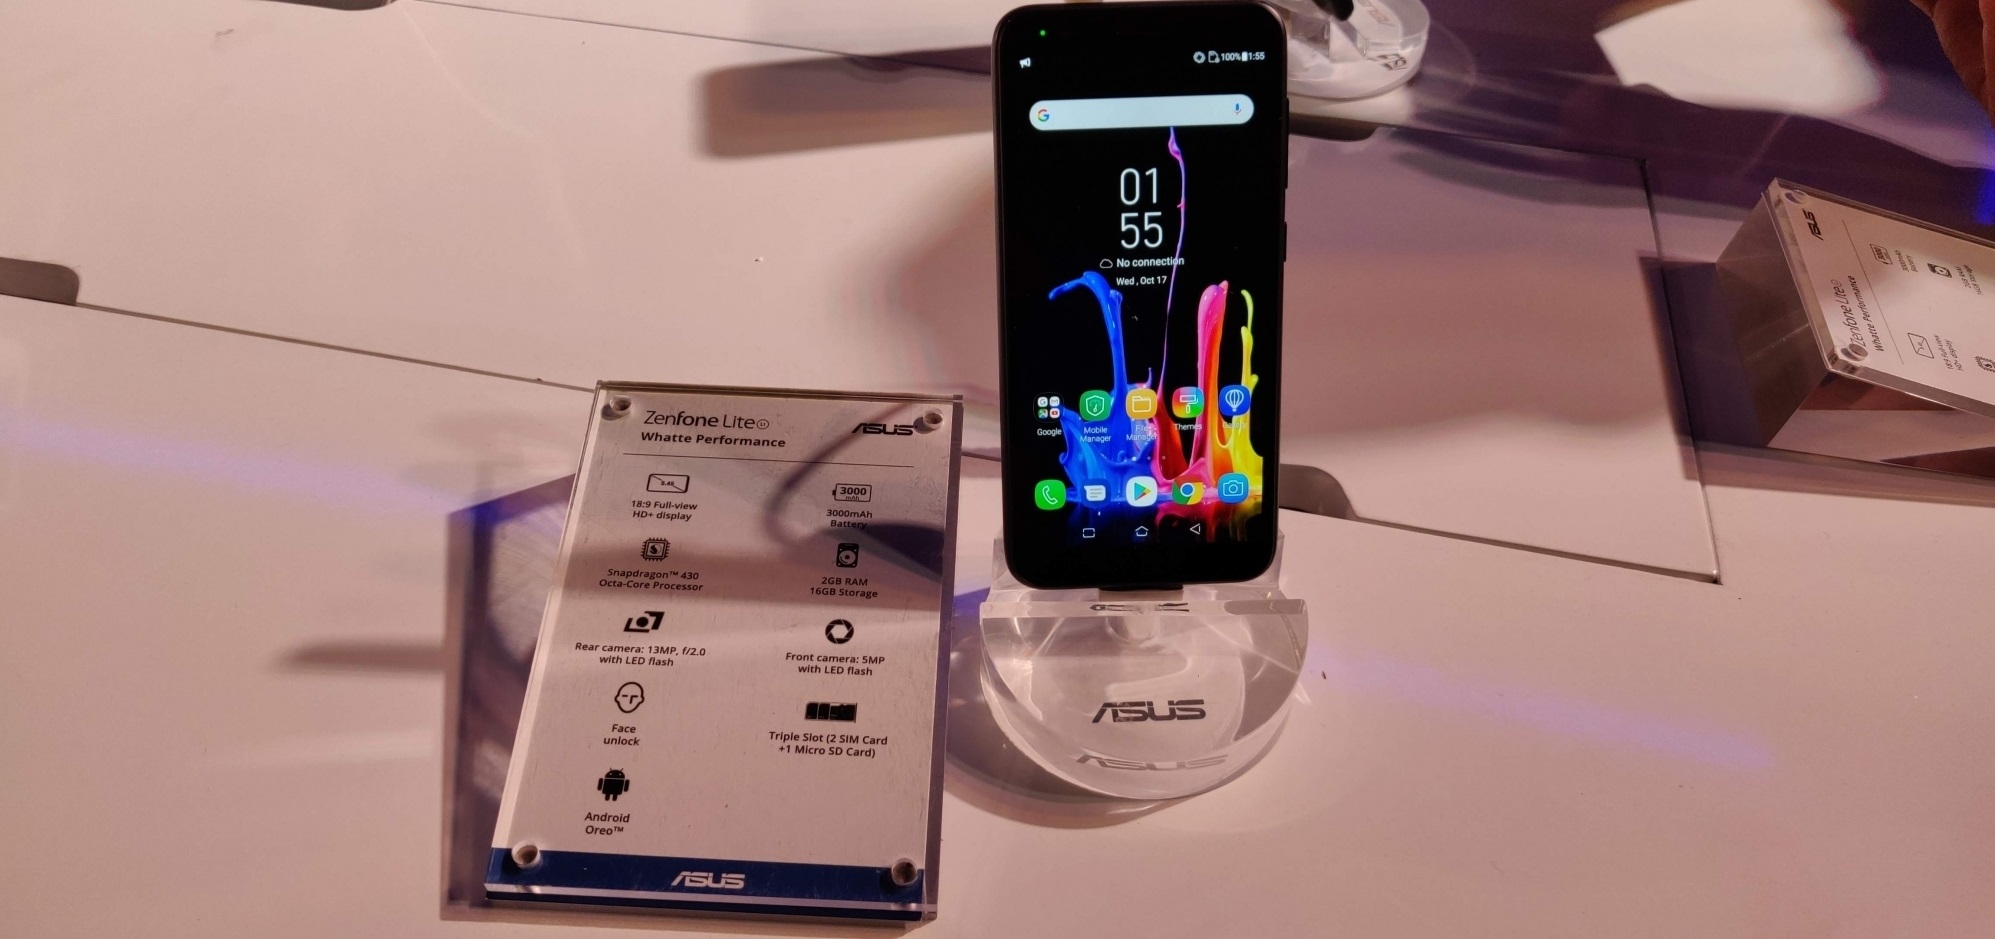 ASUS, Diwali festival, ZenFon, Taiwanese company, Taiwanese smartphones, Mobile and smartphone, Gadget news, Technology news